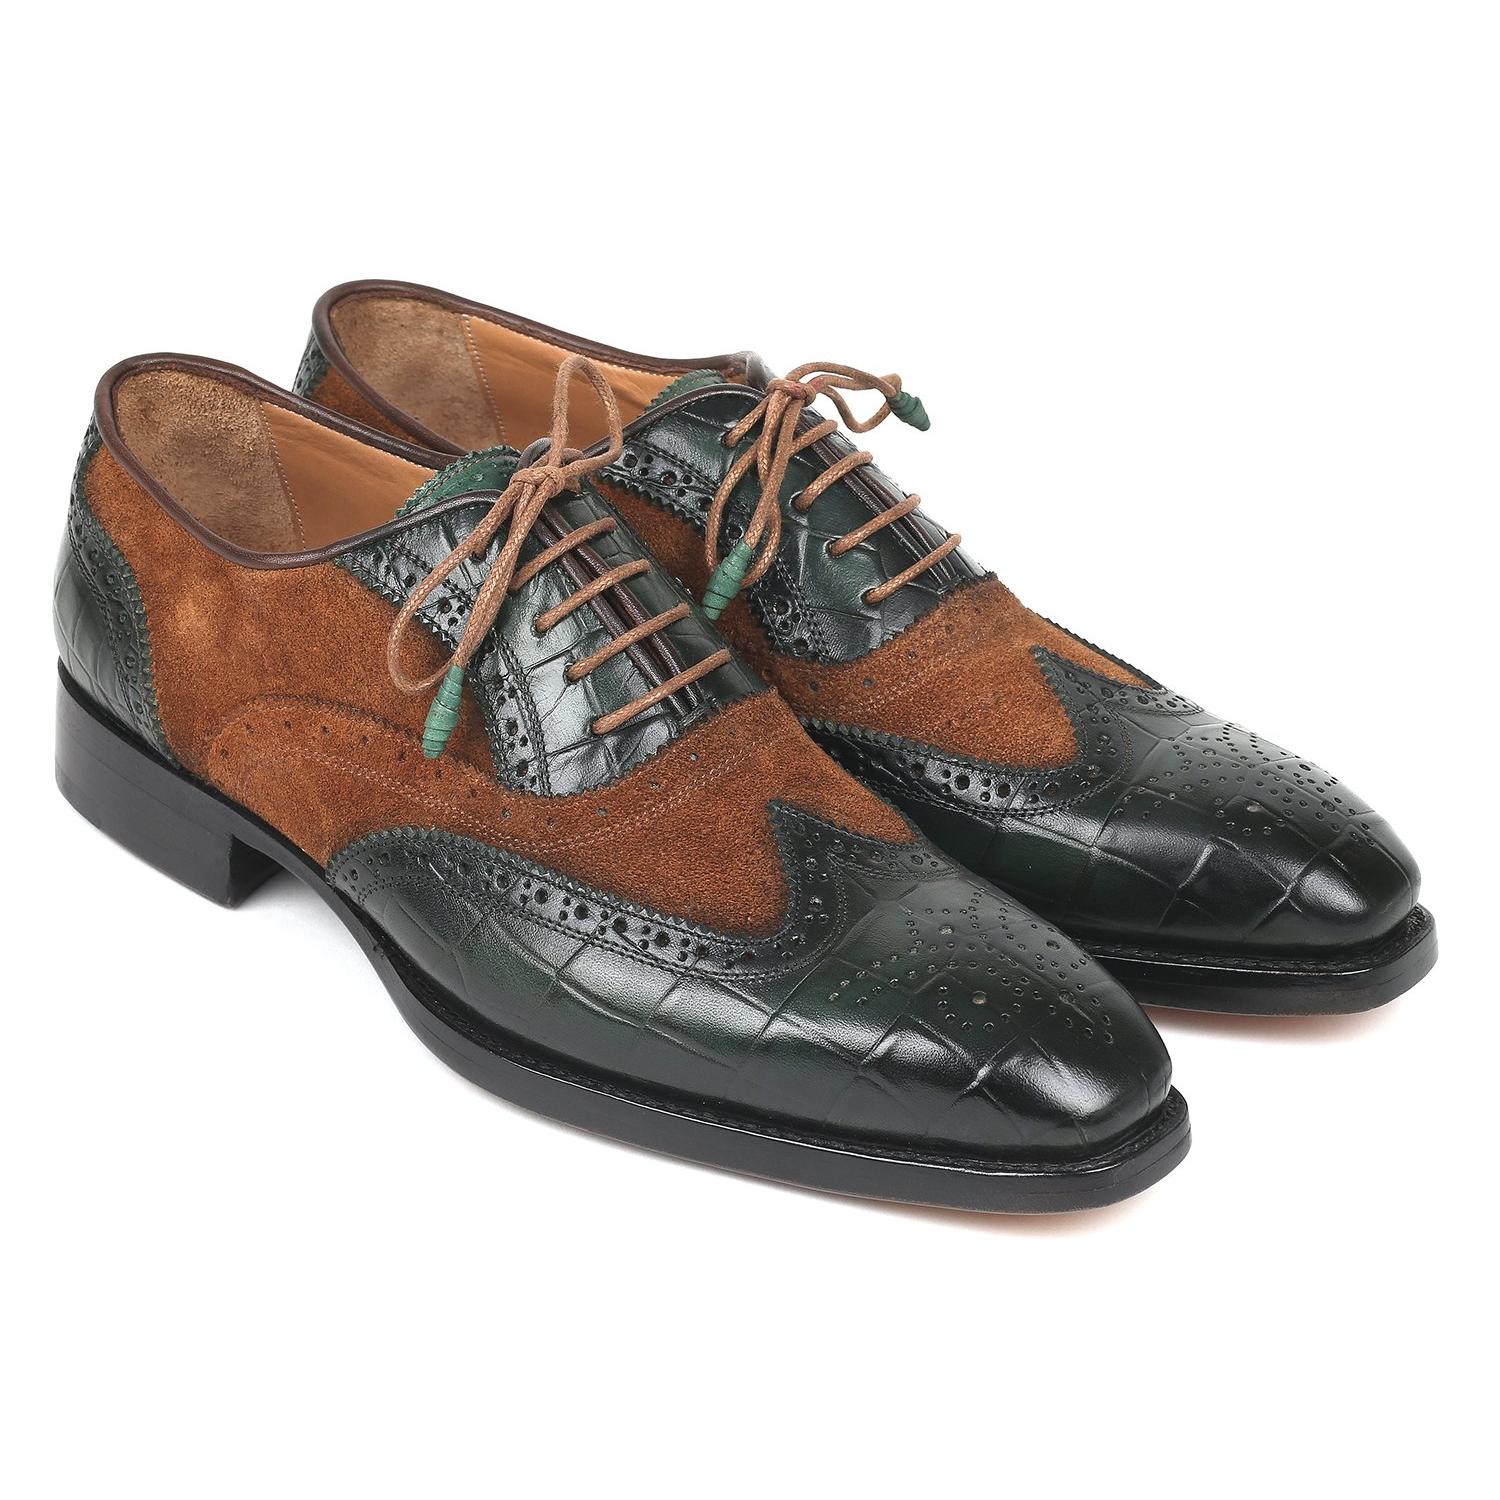 green wingtip shoes